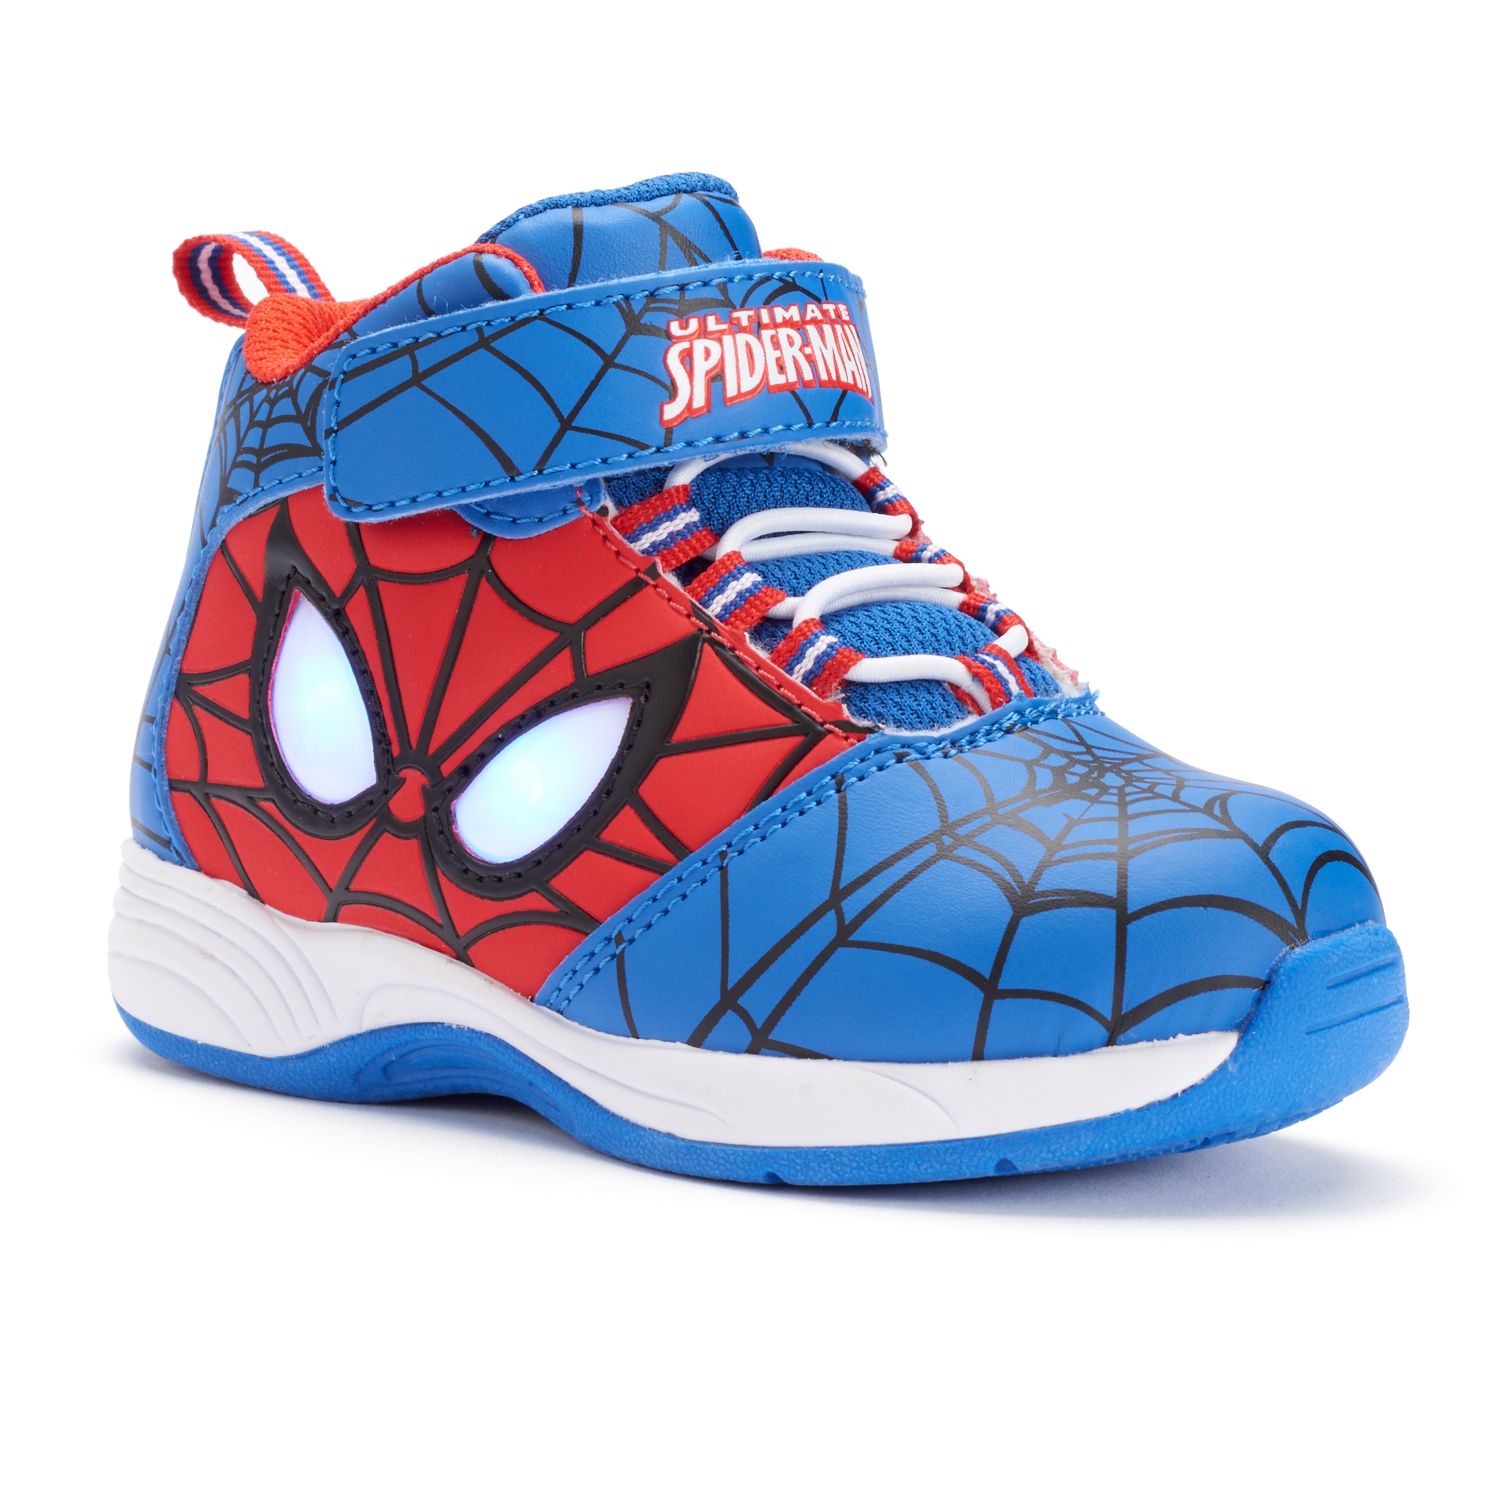 spider basketball shoes